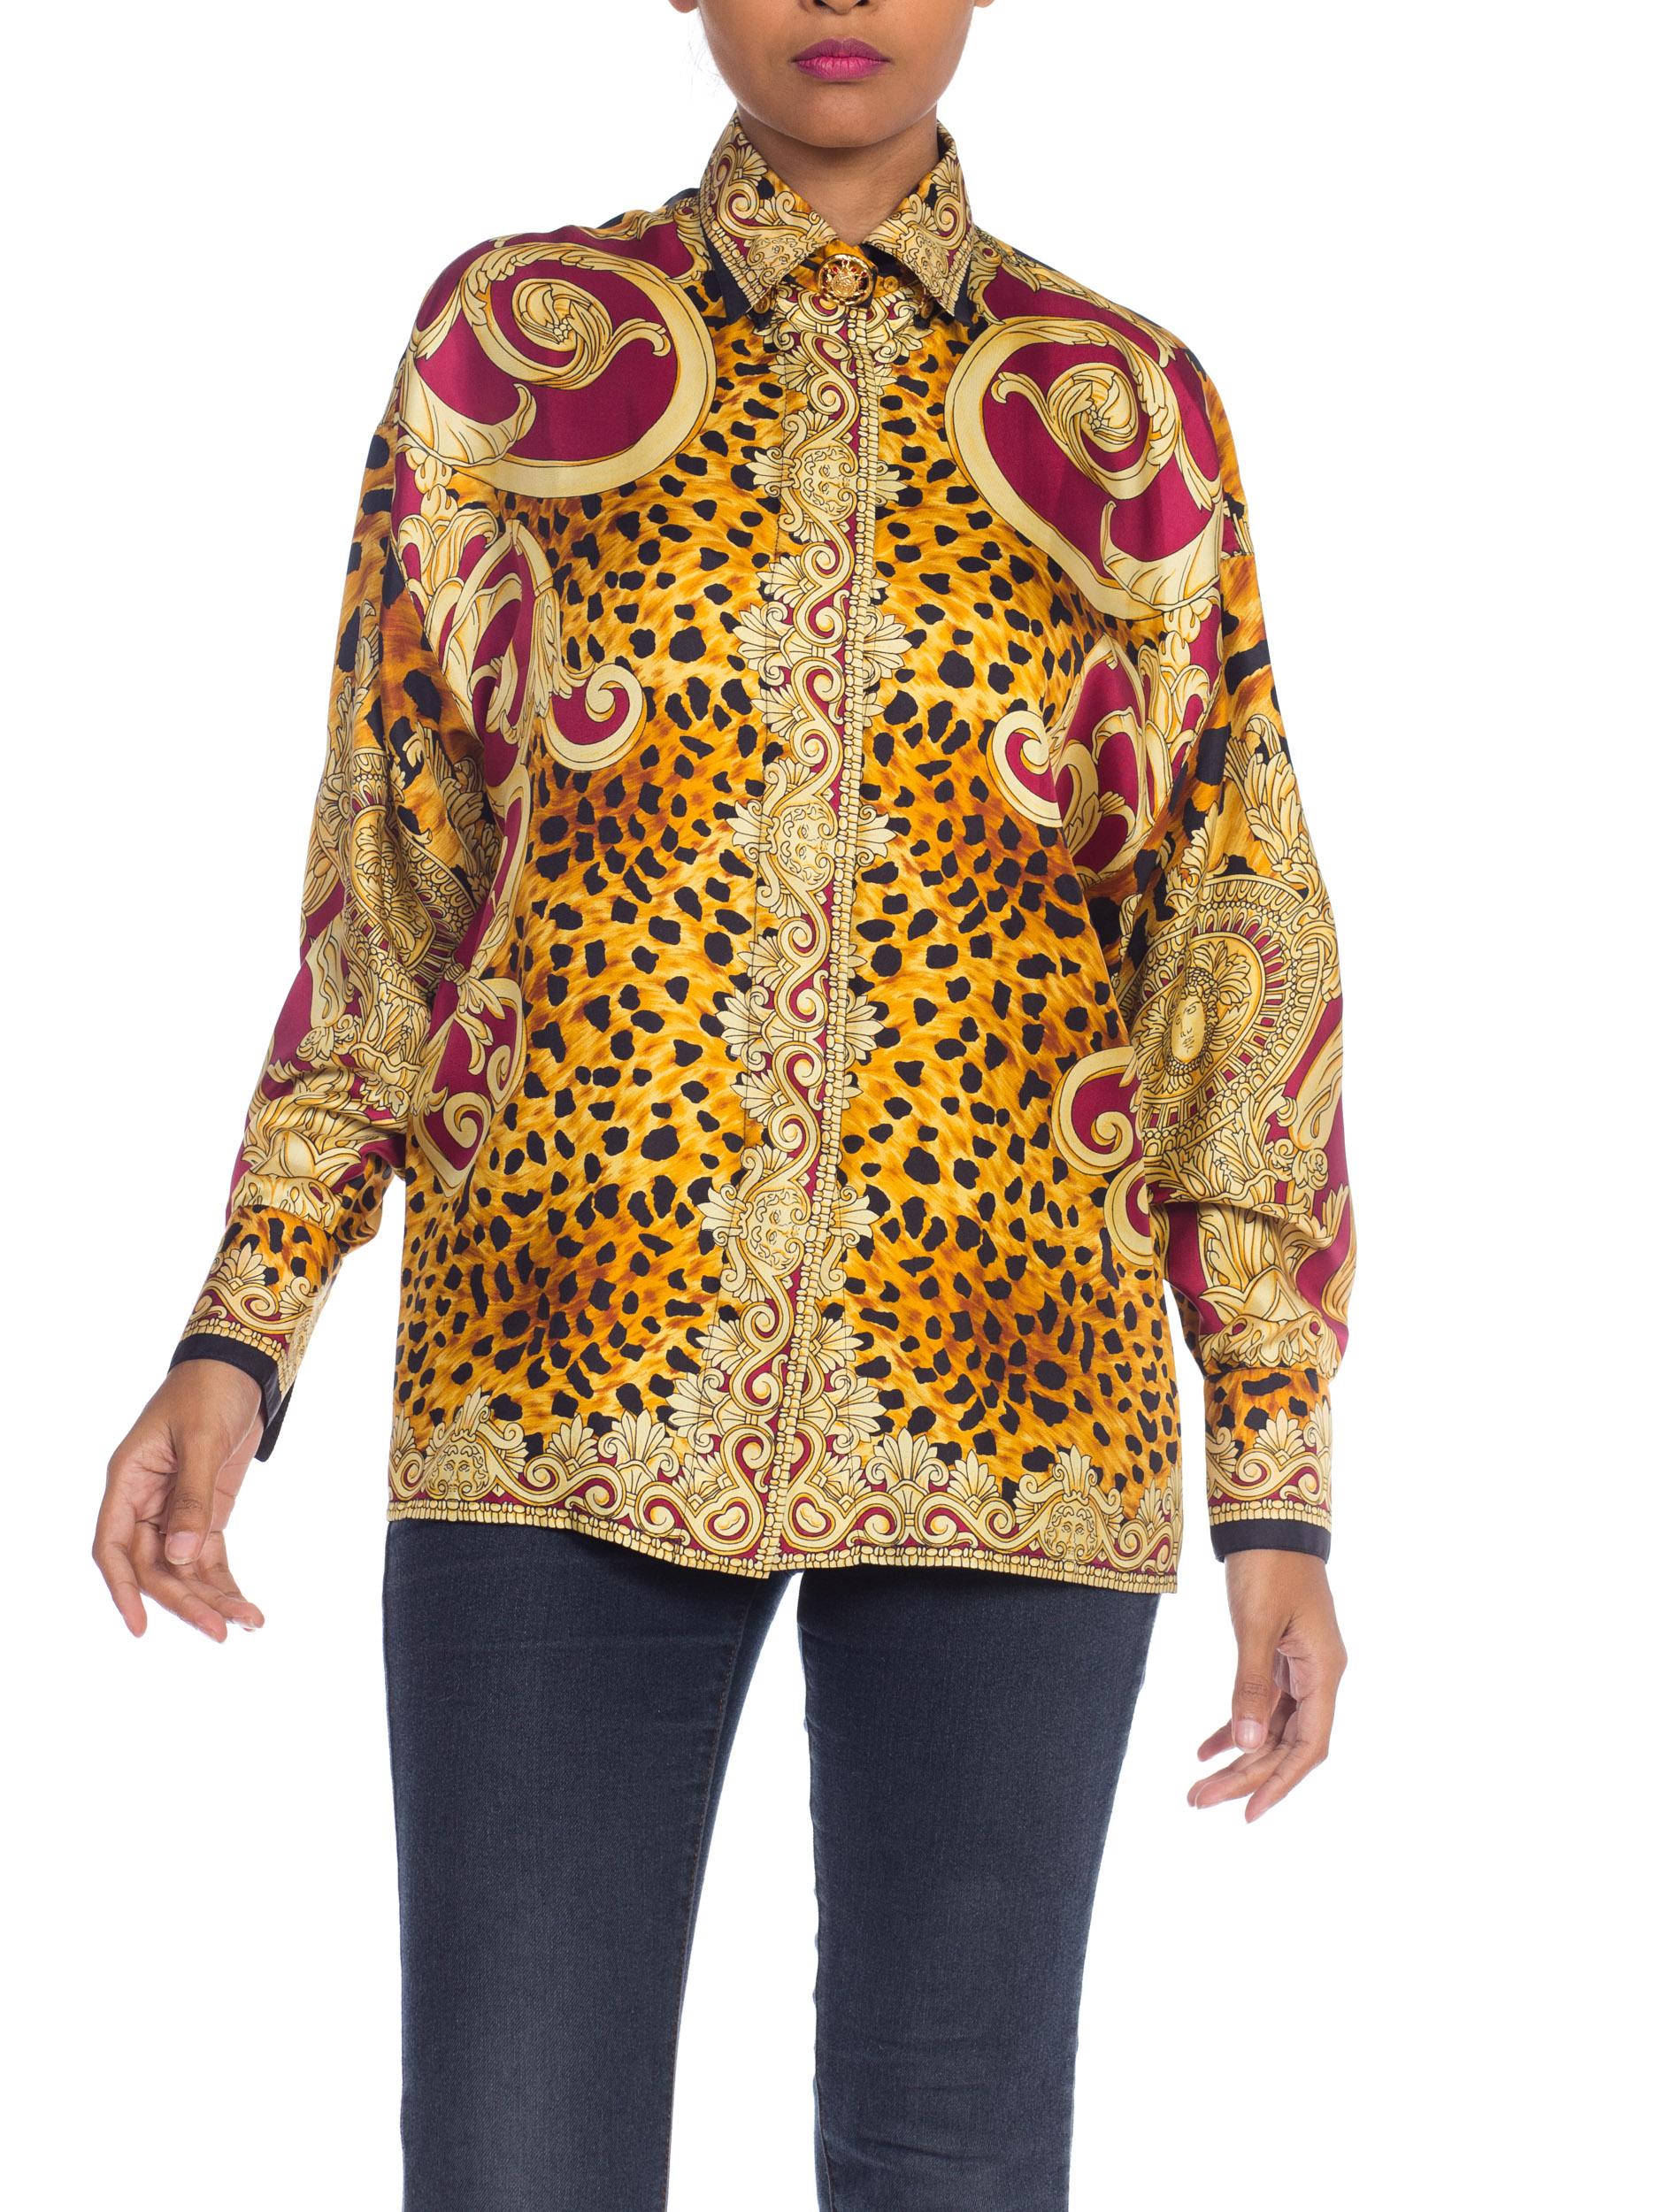 1990S GIANNI VERSACE Gold Baroque & Leopard Silk Shirt With Crystals Buttons 12